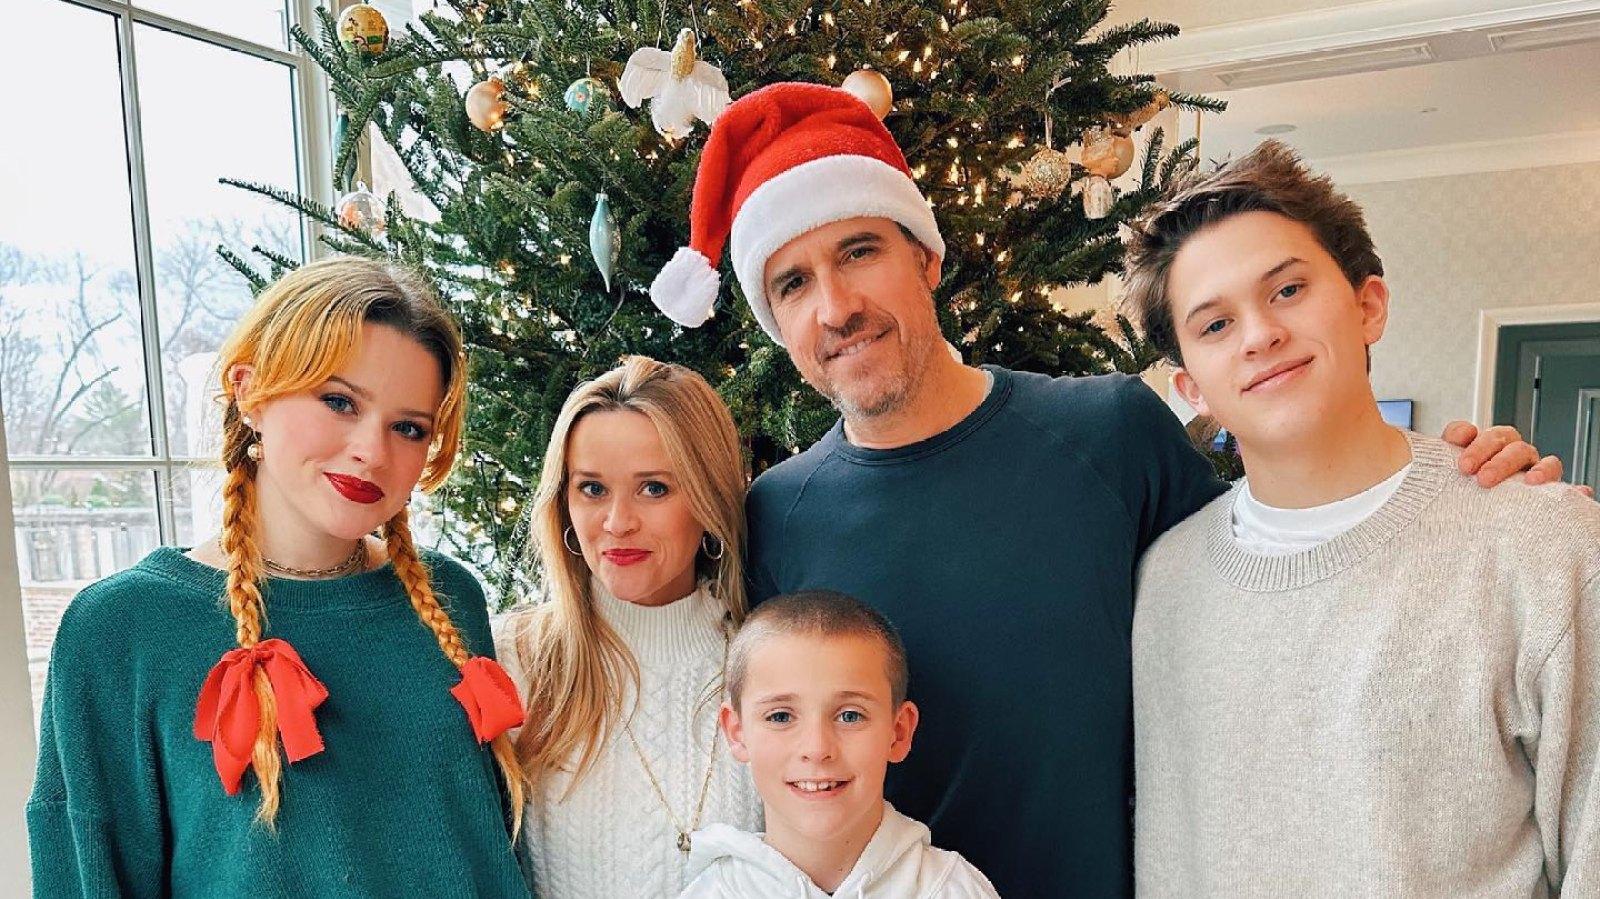 Reese Witherspoon Shared Family Photos With Jim Toth Before Split